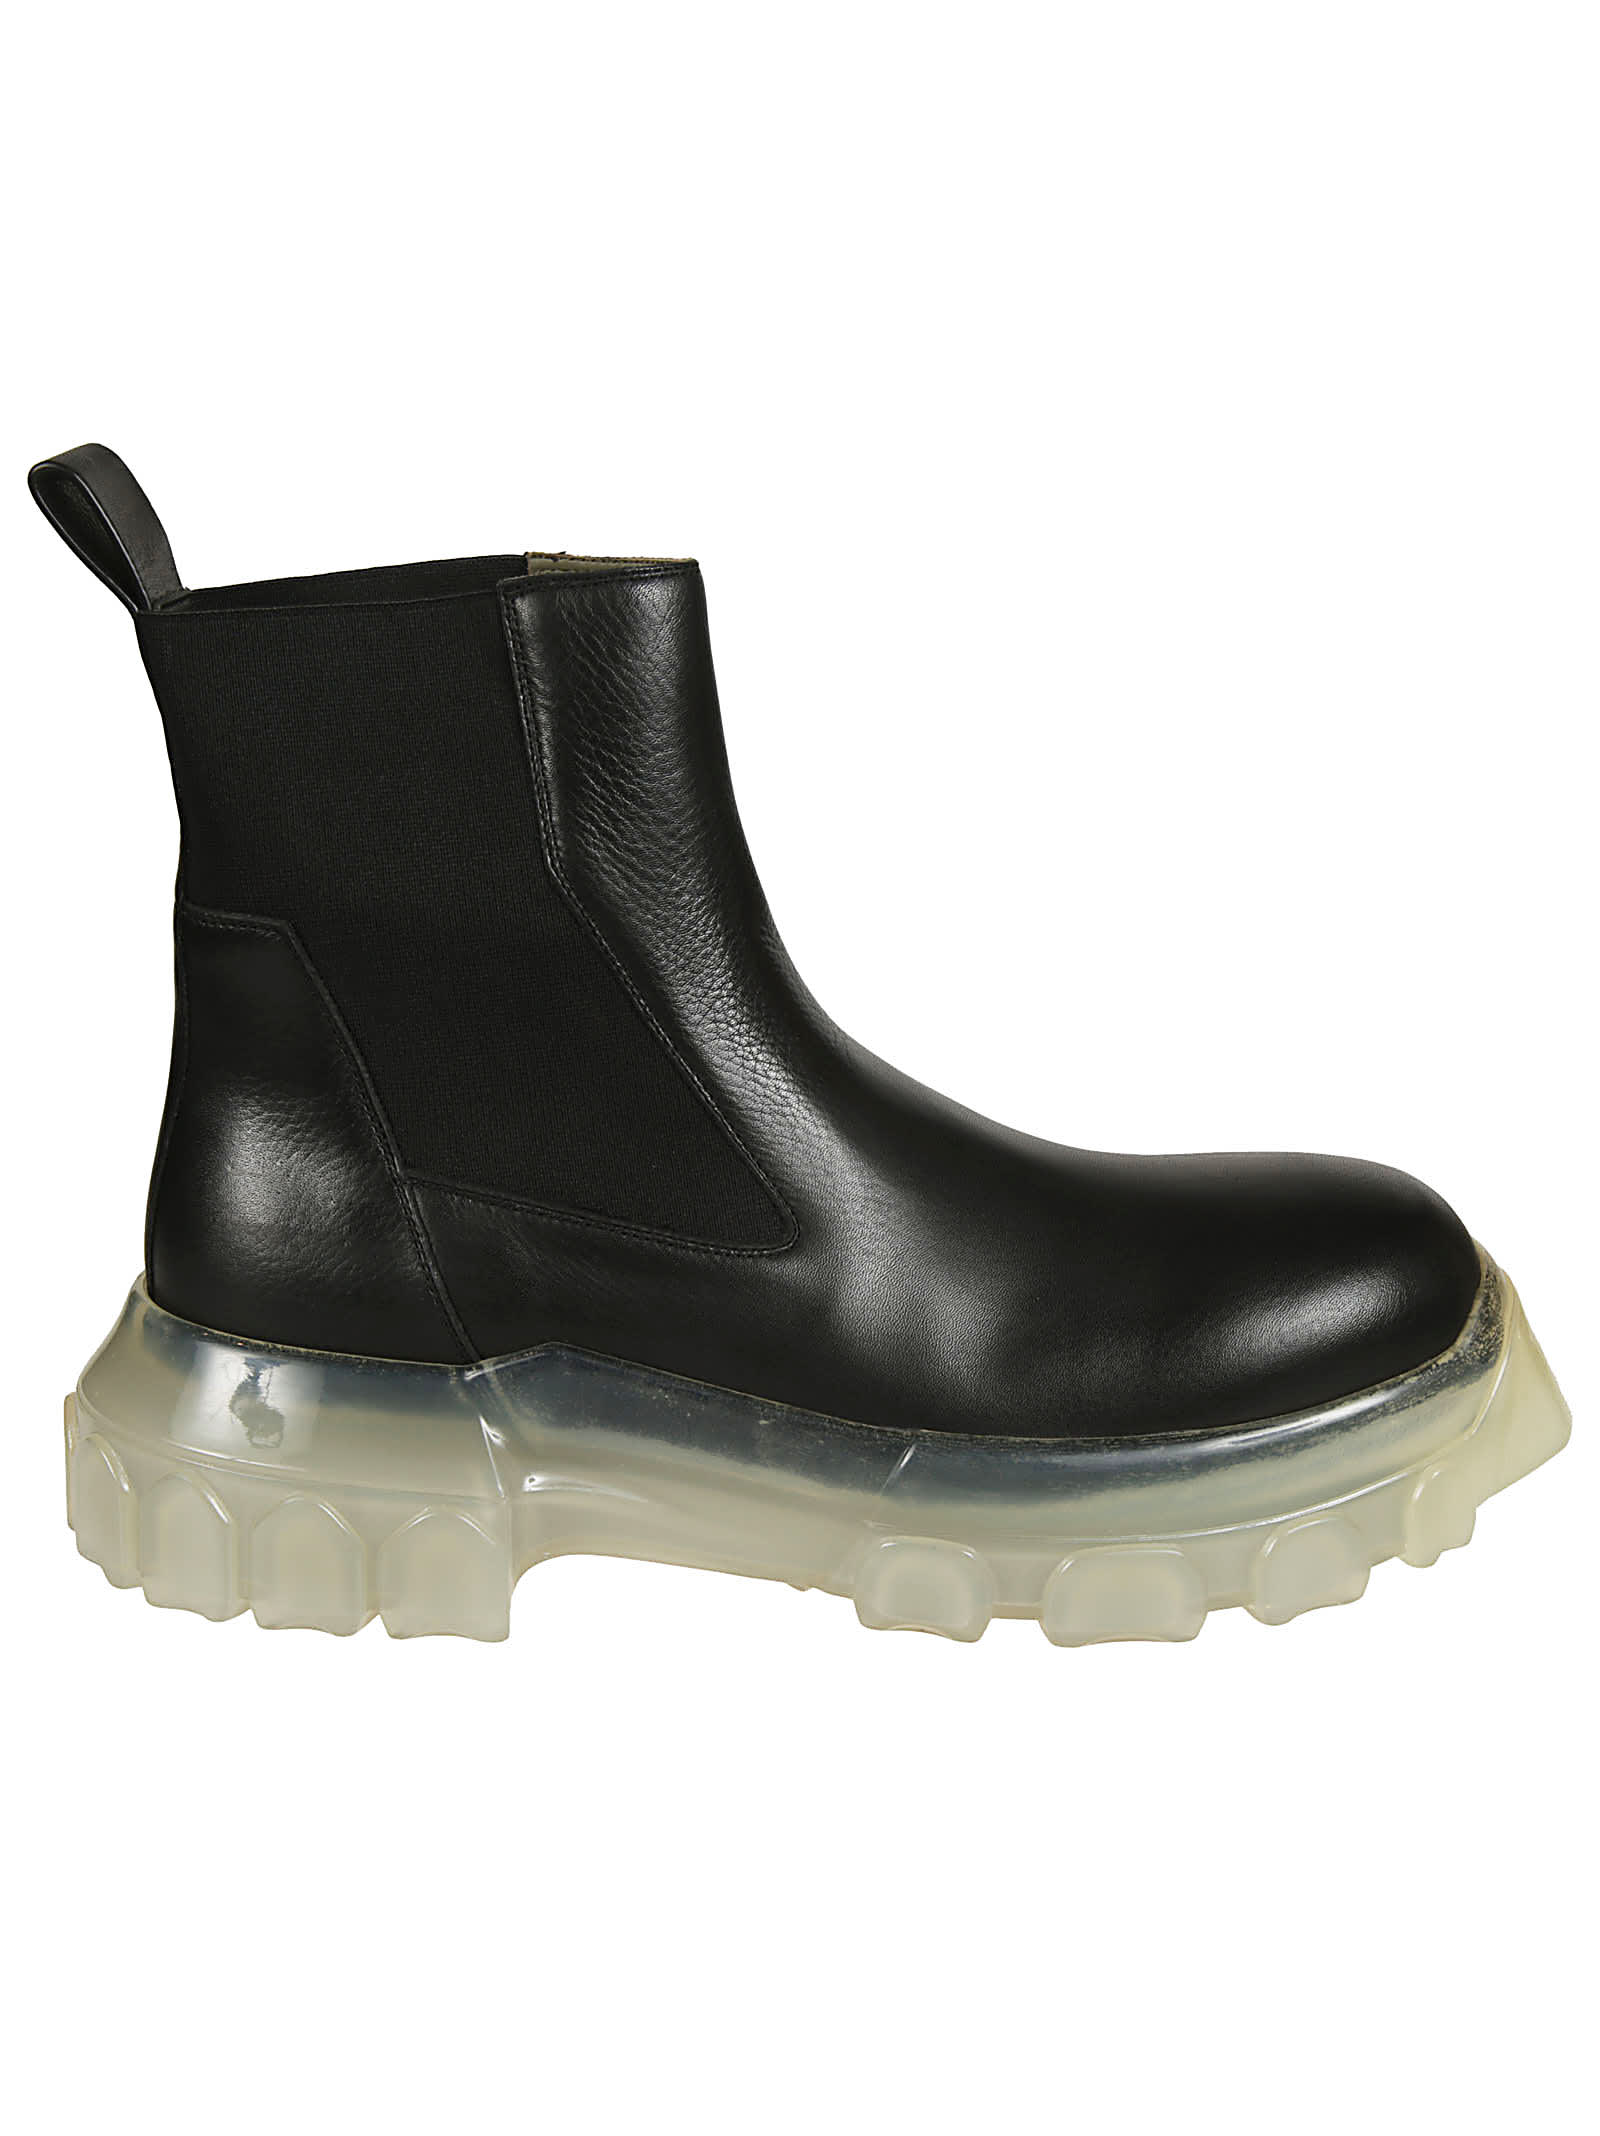 Rick Owens Bozo Tractor Beetle Boots